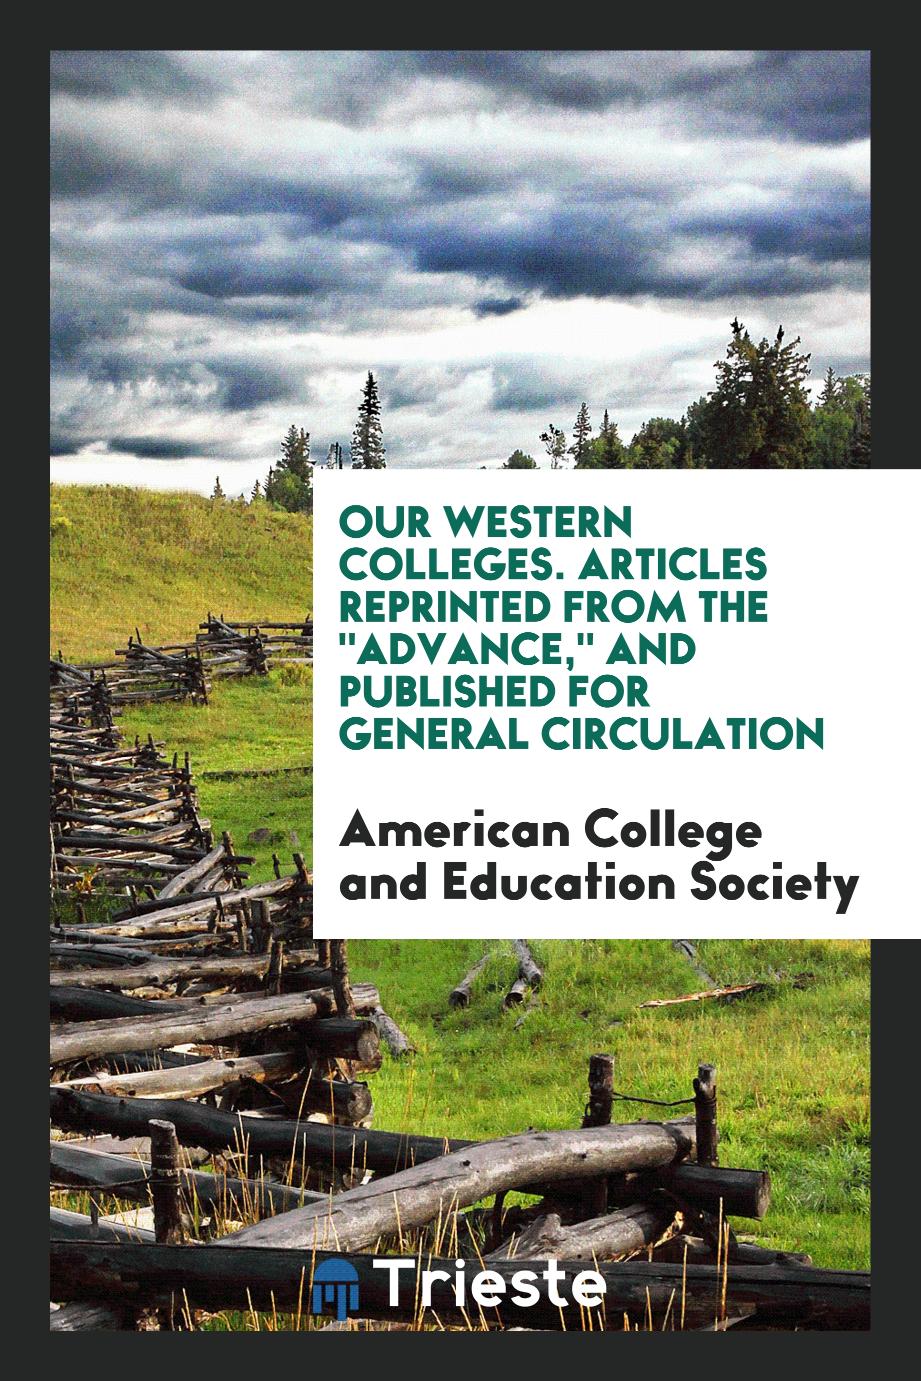 Our Western Colleges. Articles Reprinted from the "Advance," and Published for General Circulation